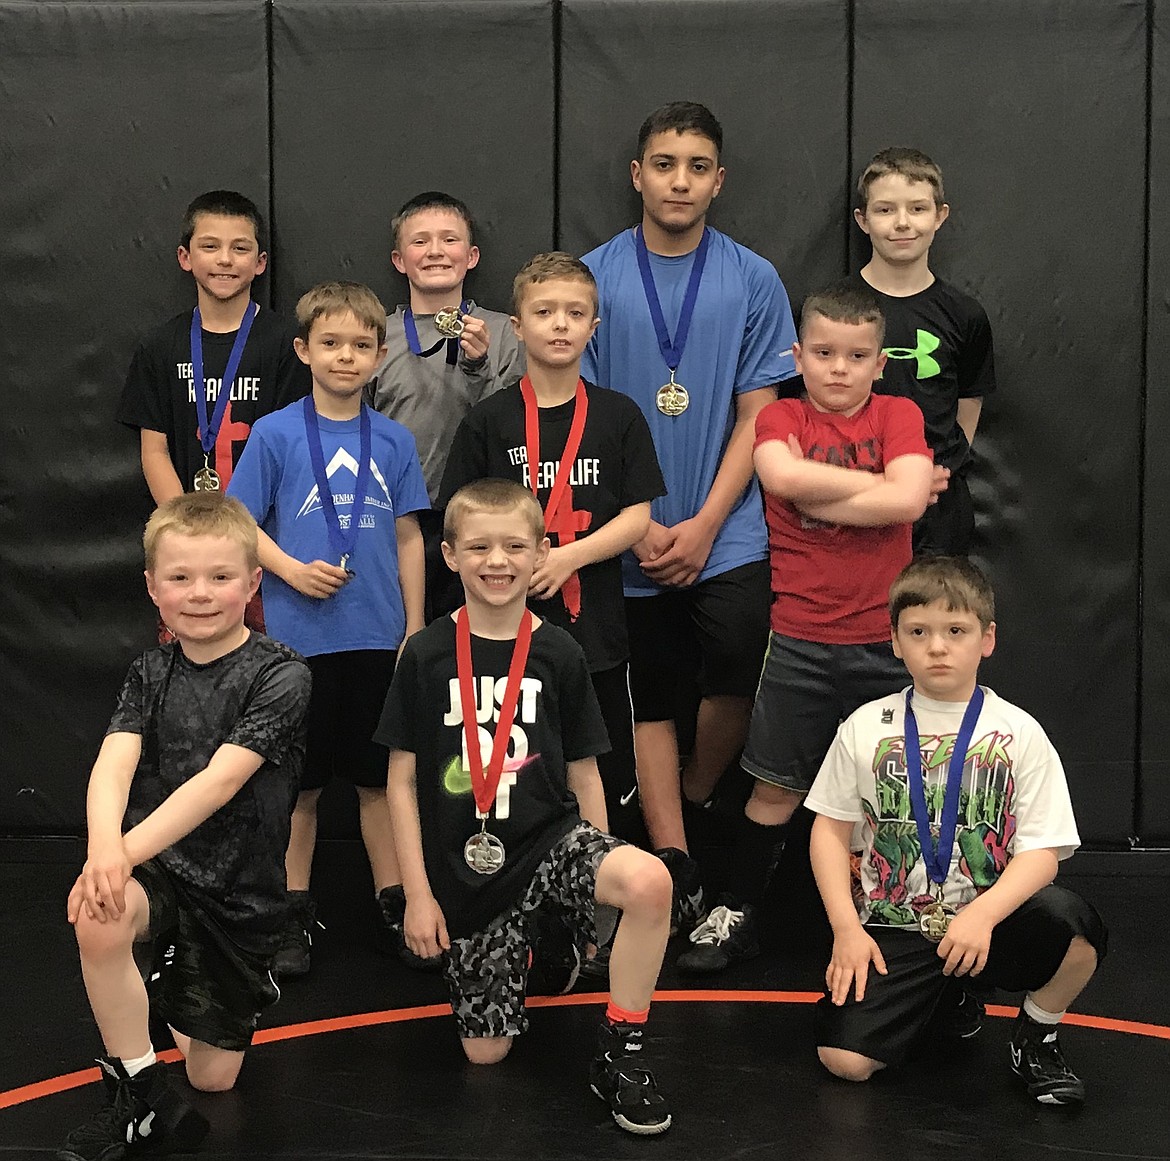 Courtesy photo
Team Real Life wrestlers participated in the Washington Little Guys Wrestling League&#146;s Gonzaga Prep event held March 24. In the front row from left are Parker Stearns, 2nd; Hunter Patzer, 2nd and Jacob Kunzi, 1st; second row from left, Tristen Mendenhall, 1st; Ryker Allen, 2nd and Paxton Purcell, 1st; and back row from left, Benjamin Carrasco, 1st; Trey Smith, 1st; Armando Laguna, 1st and Connor McCarroll, 2nd. Not pictured, but placing: Wyatt Hinderager, 3rd; Jonathan Hansen, 1st; Briley Arnett, 1st and Braxton Jerald, 1st.